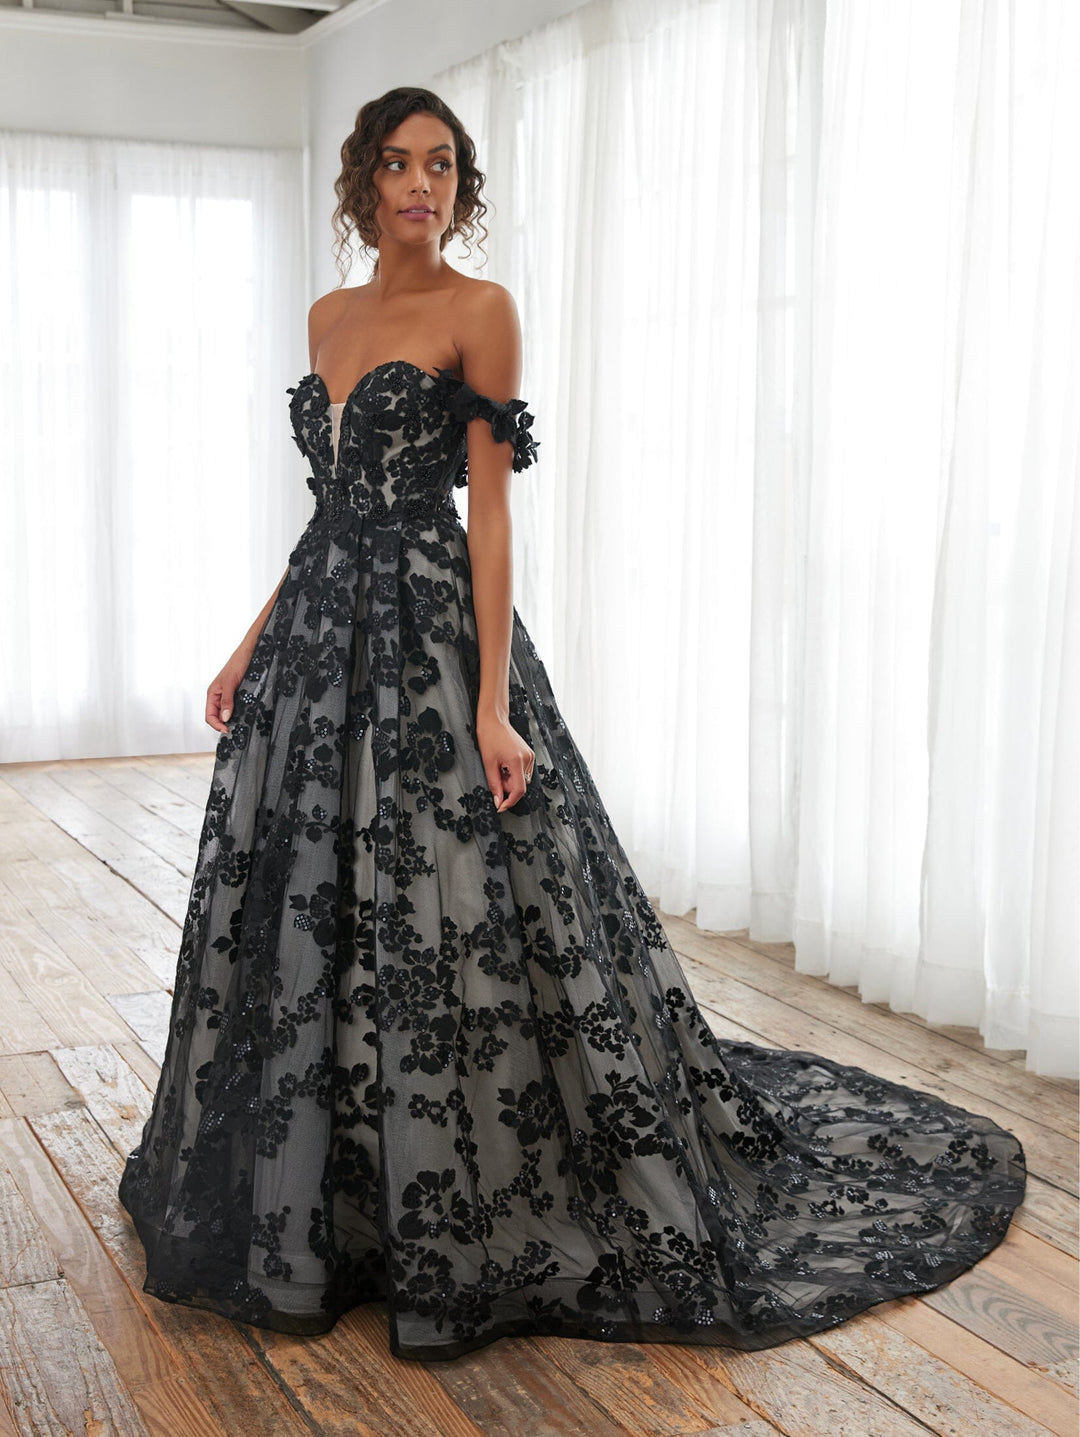 3D Floral Off Shoulder Bridal Gown by Adrianna Papell 31238